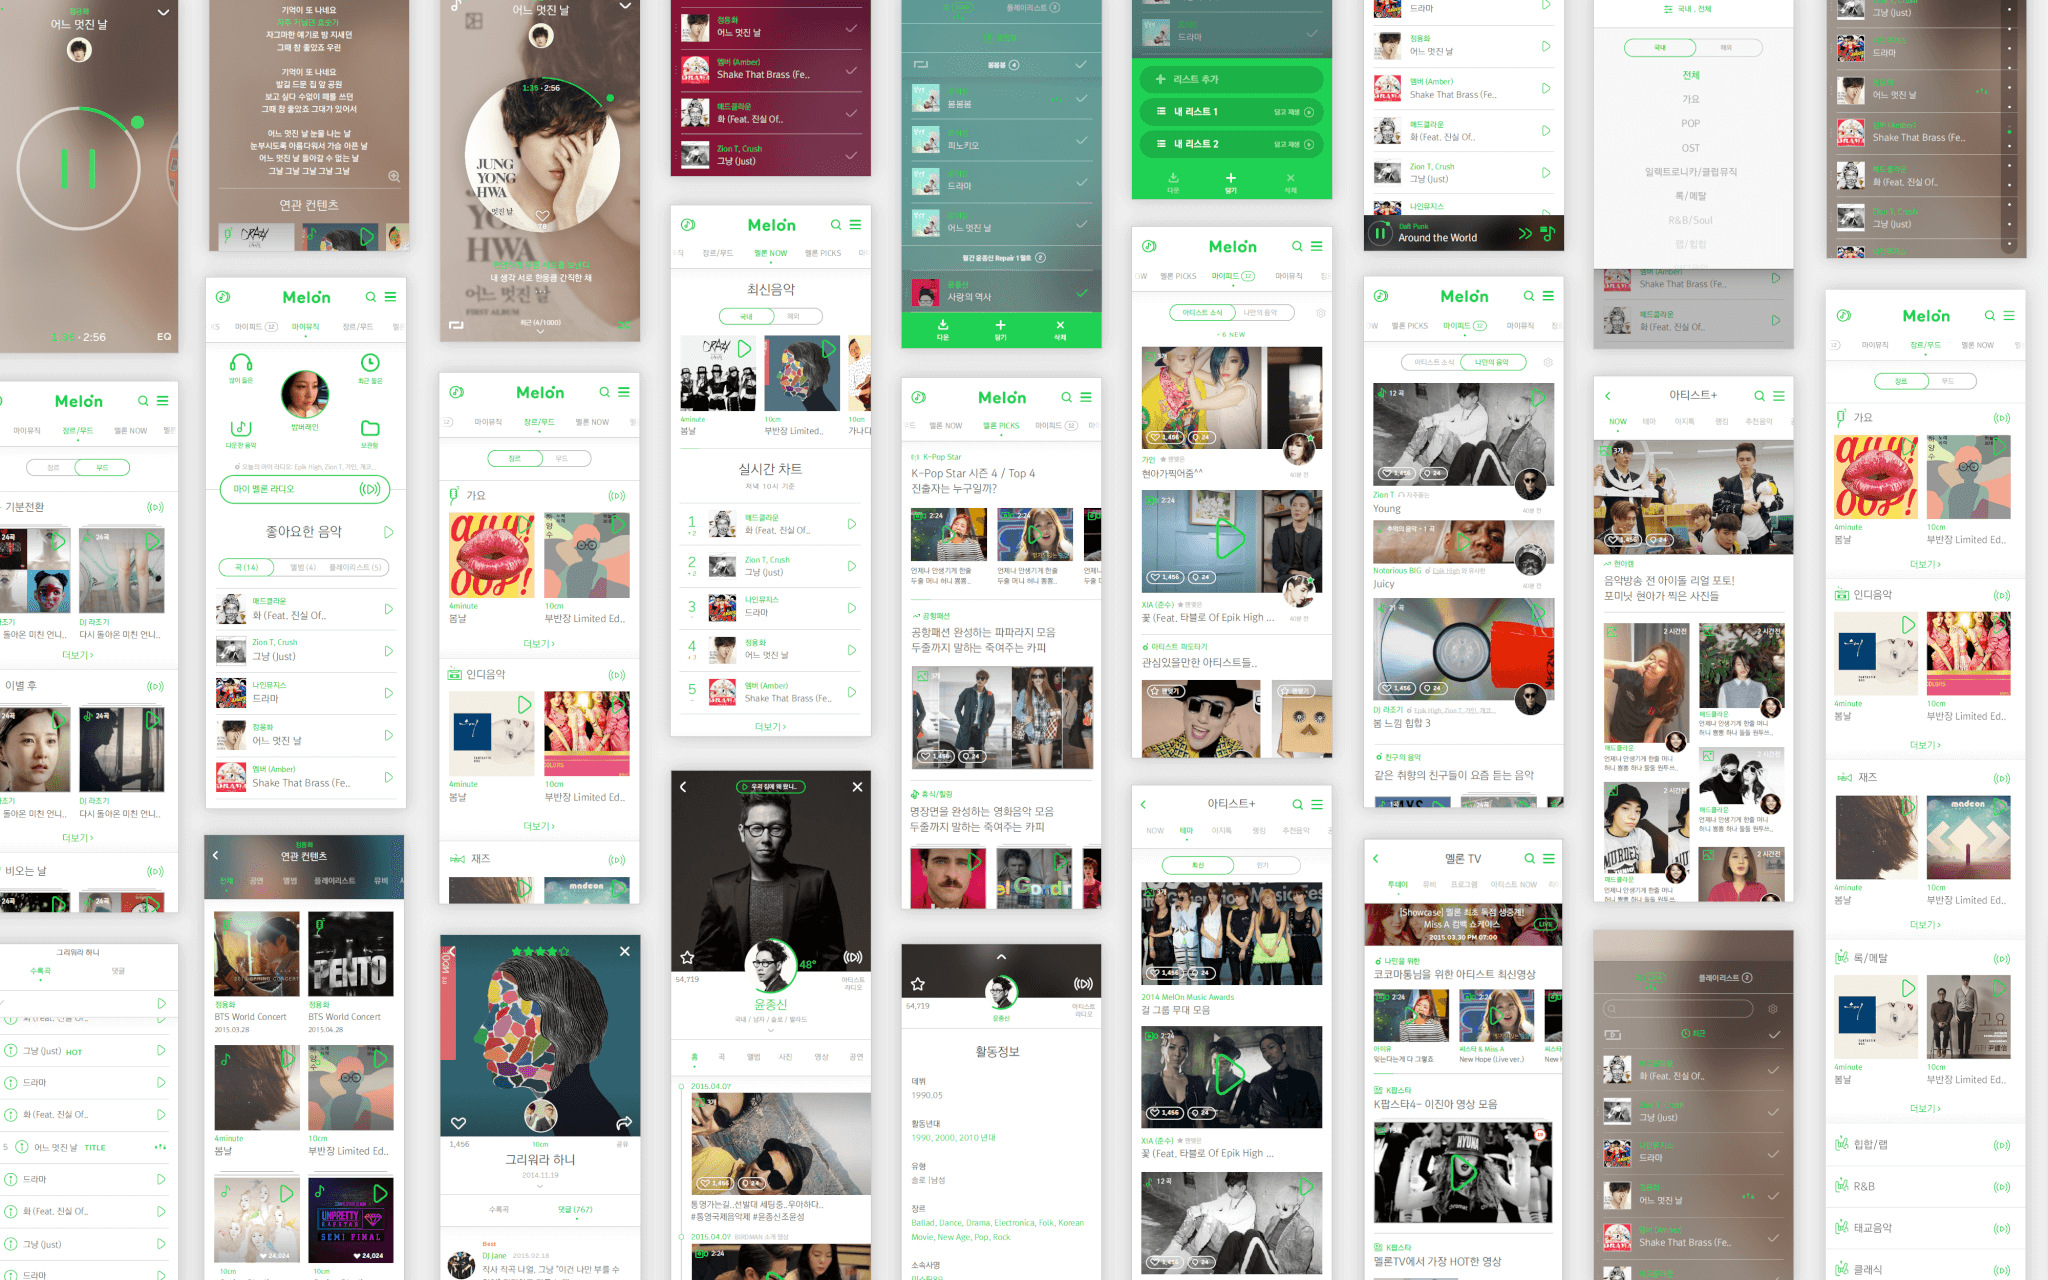 How to distribute music on Melon